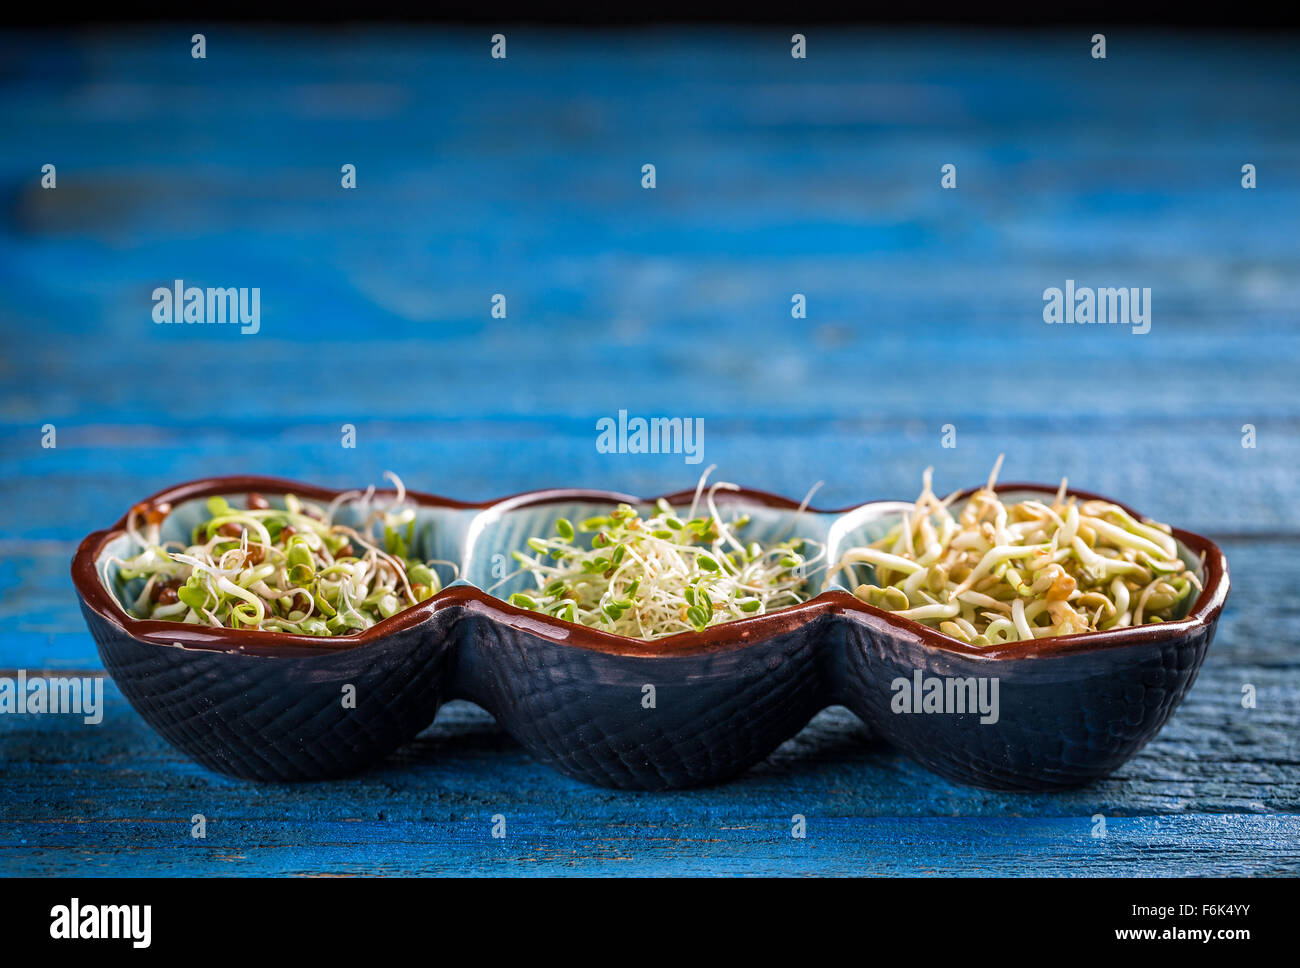 Radish, red clover and fenugreek sprouts in blue small bowl Stock Photo